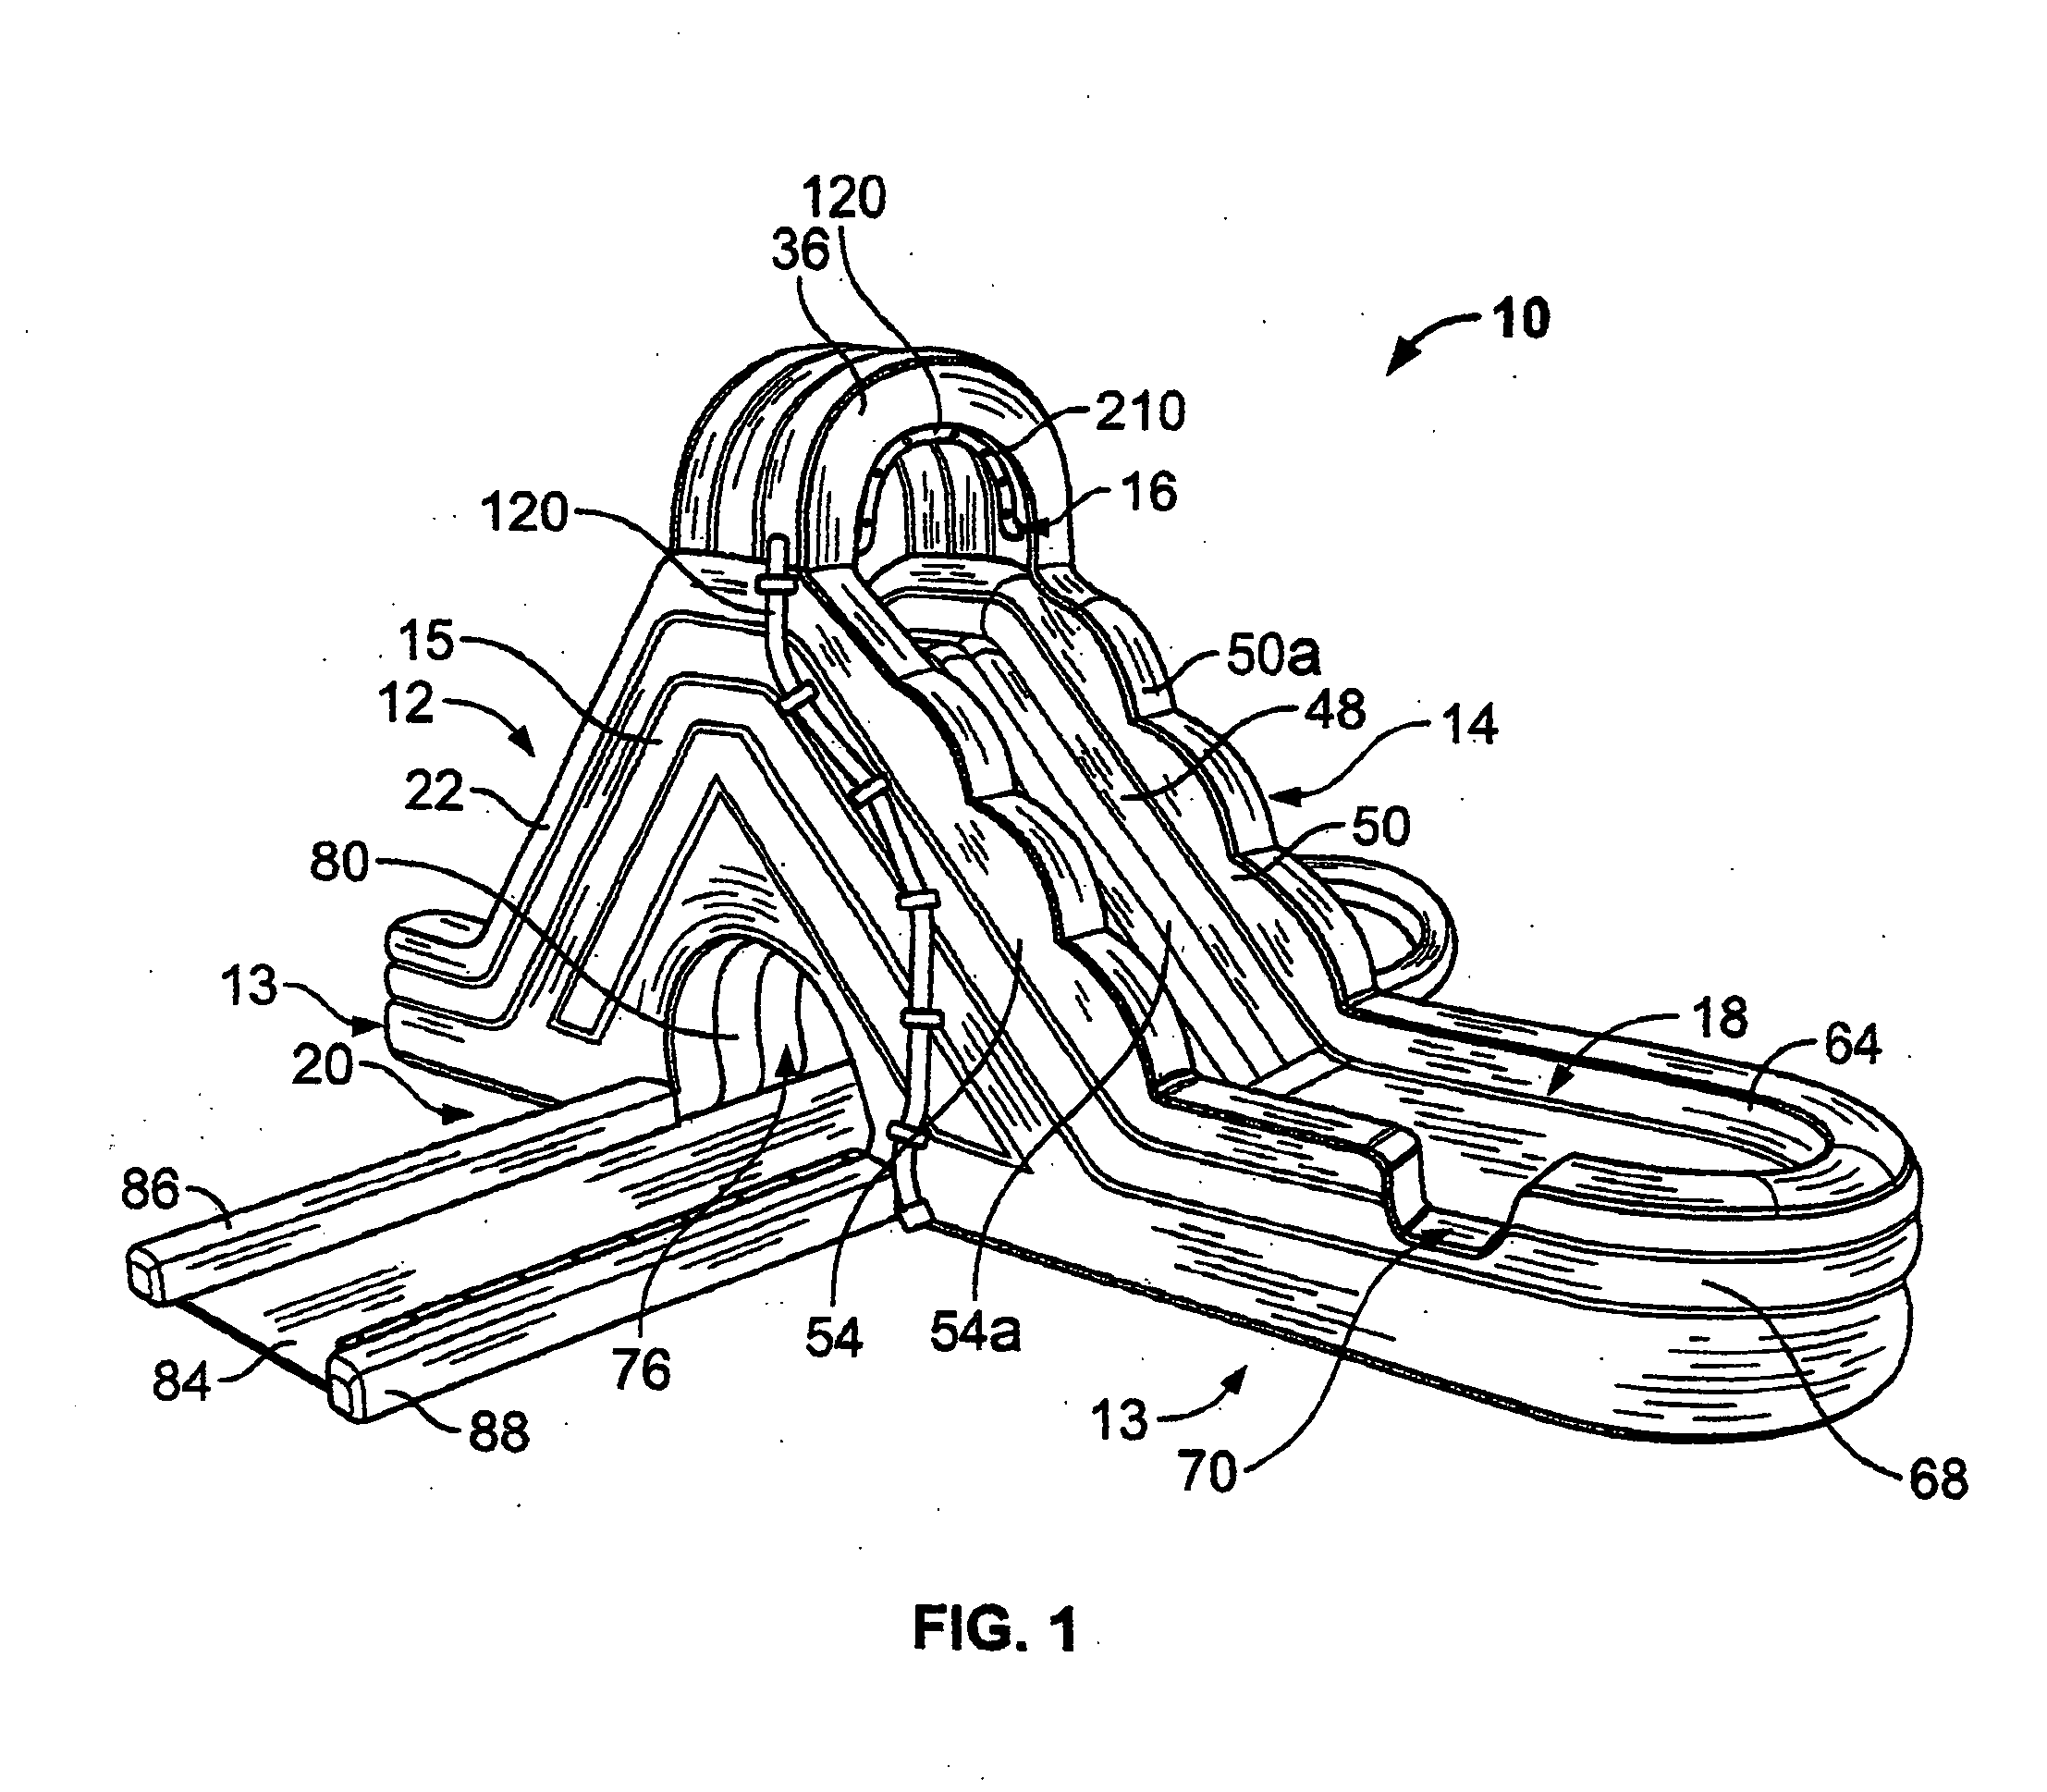 Inflatable ship-configured water toy and method